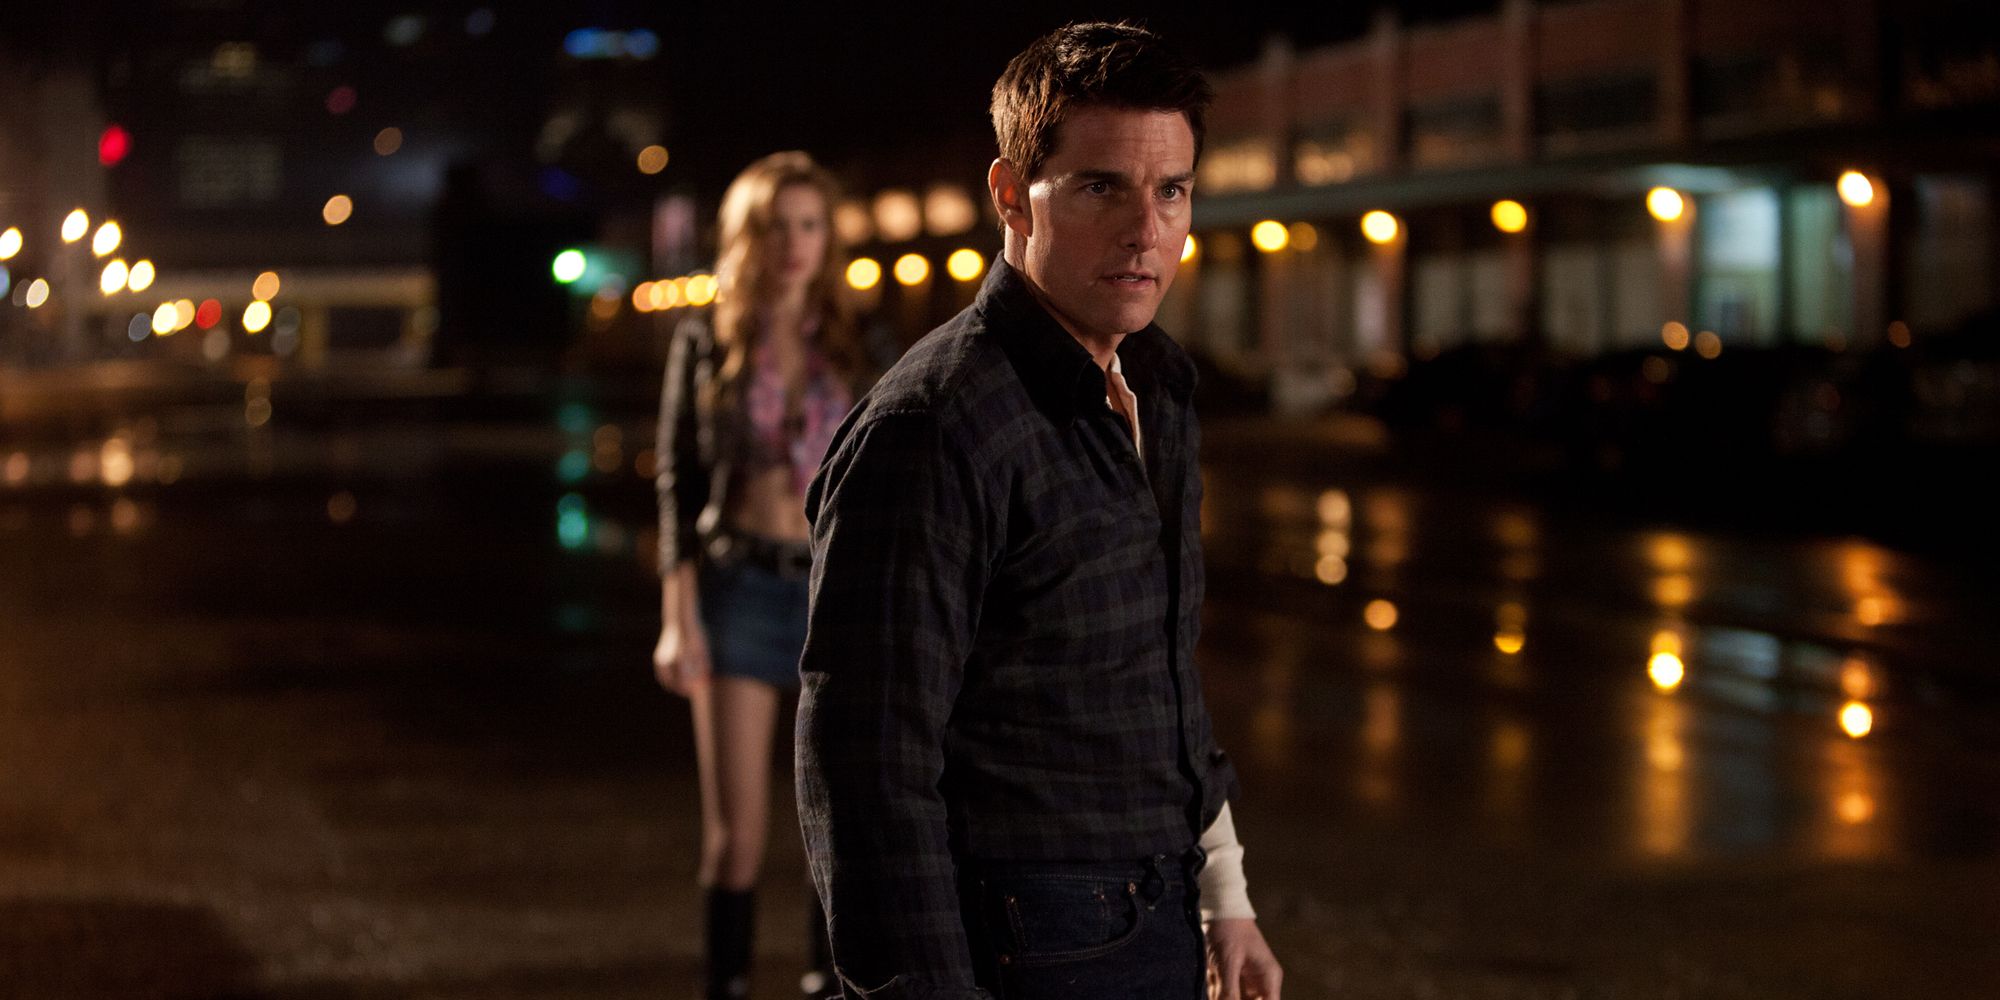 Is Jack Reacher On Netflix, Hulu Or Prime? Where To Watch Online